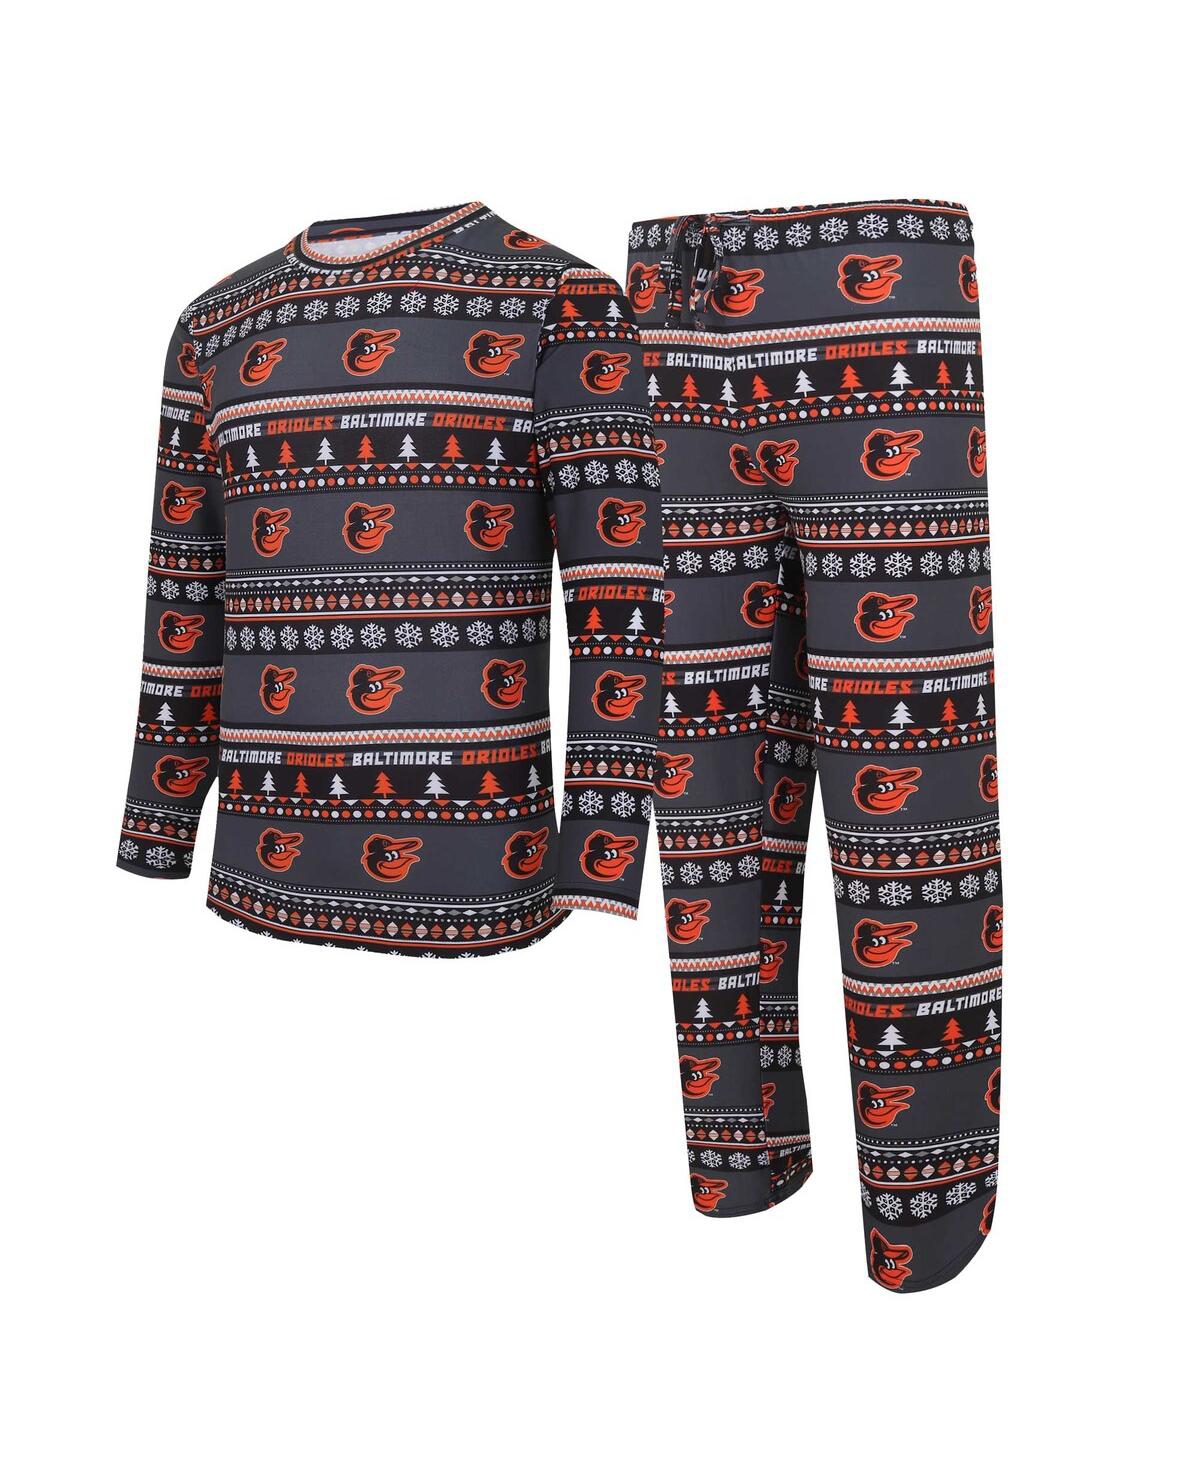 Men's Concepts Sport Black Baltimore Orioles Knit Ugly Sweater Long Sleeve Top and Pants Set - Black